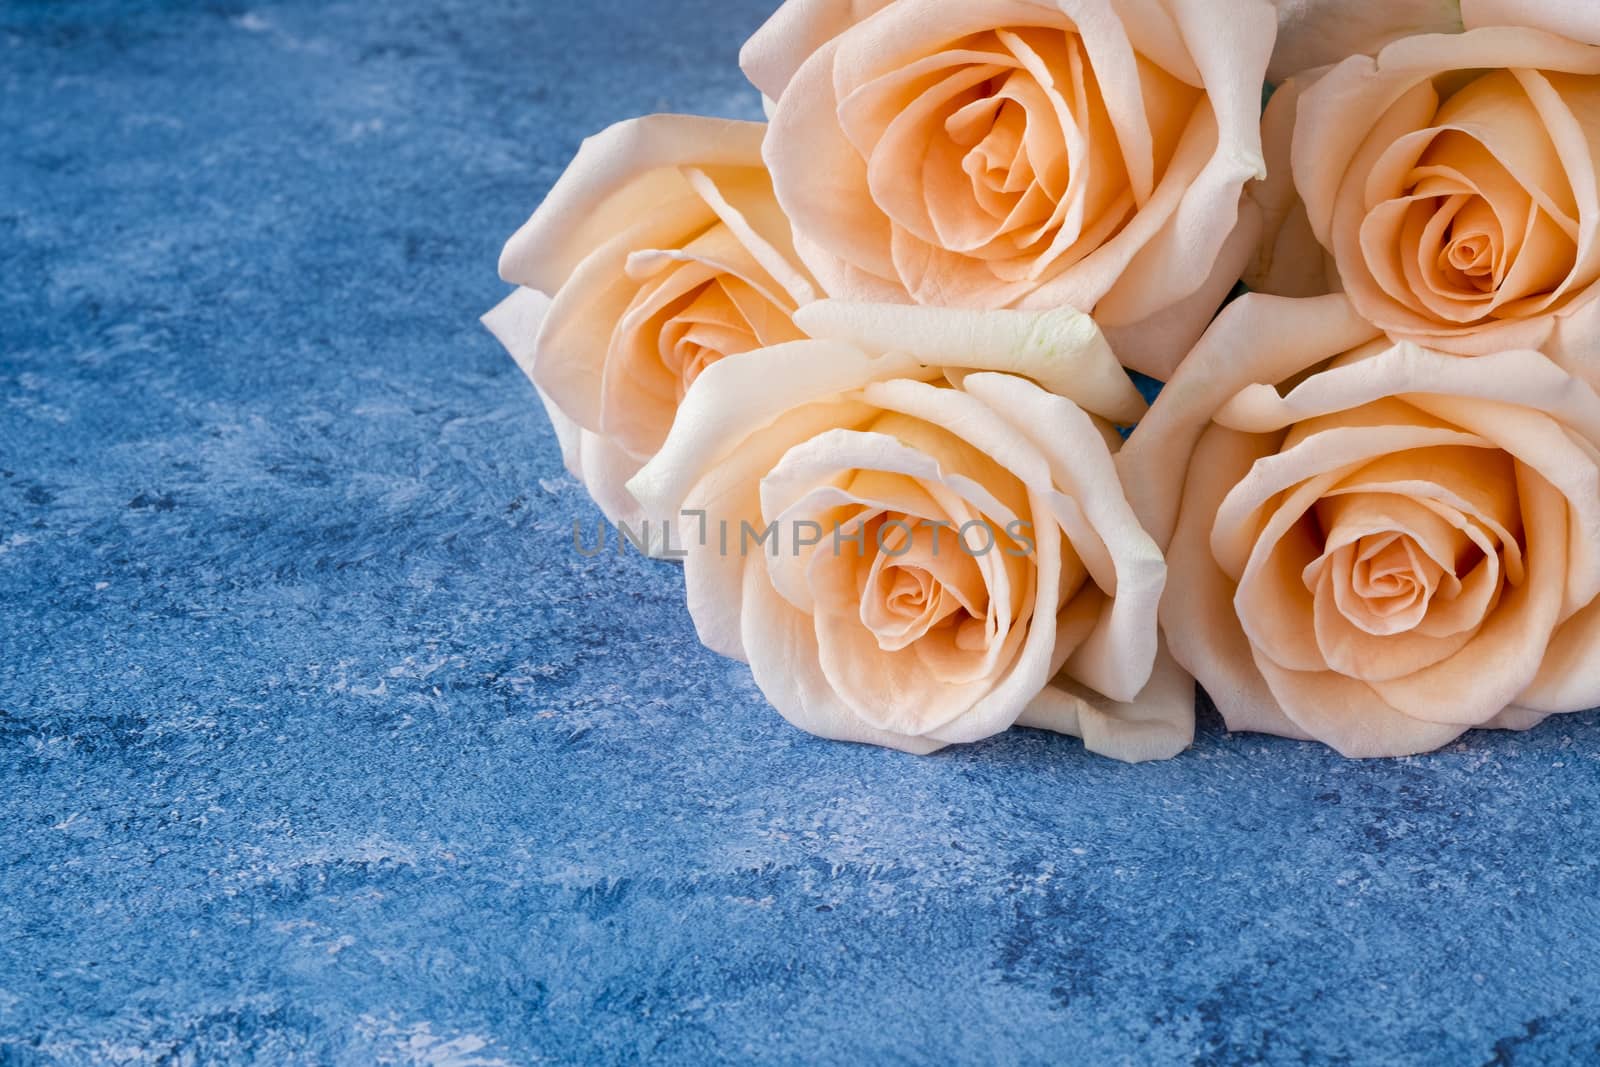 Bouquet of beautiful peach color roses on a blue and white acryl by Nawoot